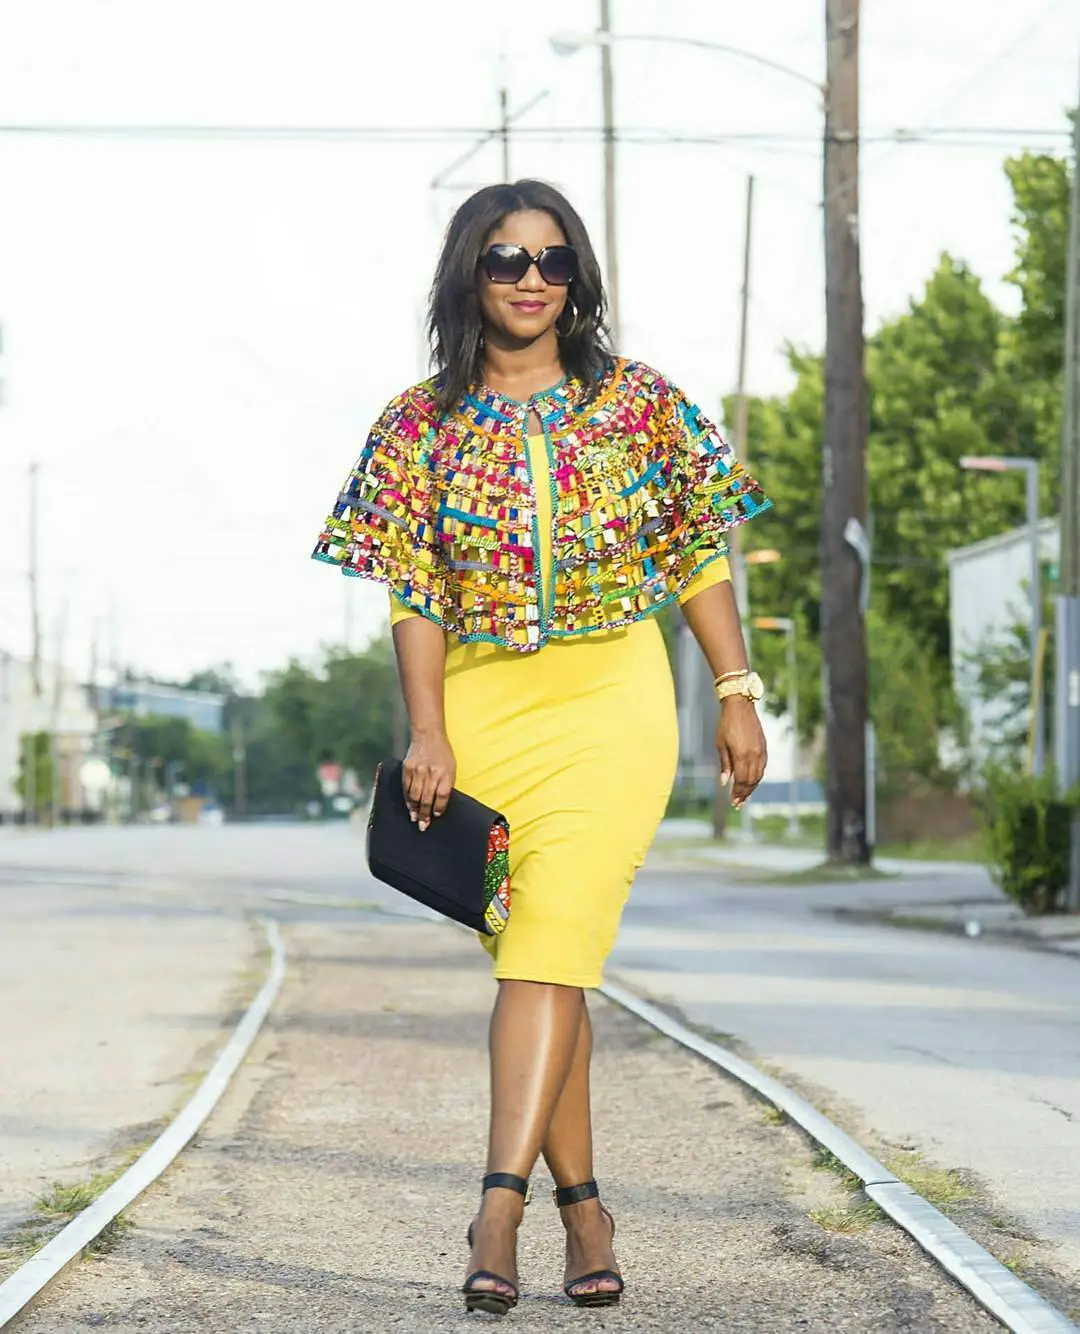 Off To Church? Get Inspired By These Fancy Church Outfits